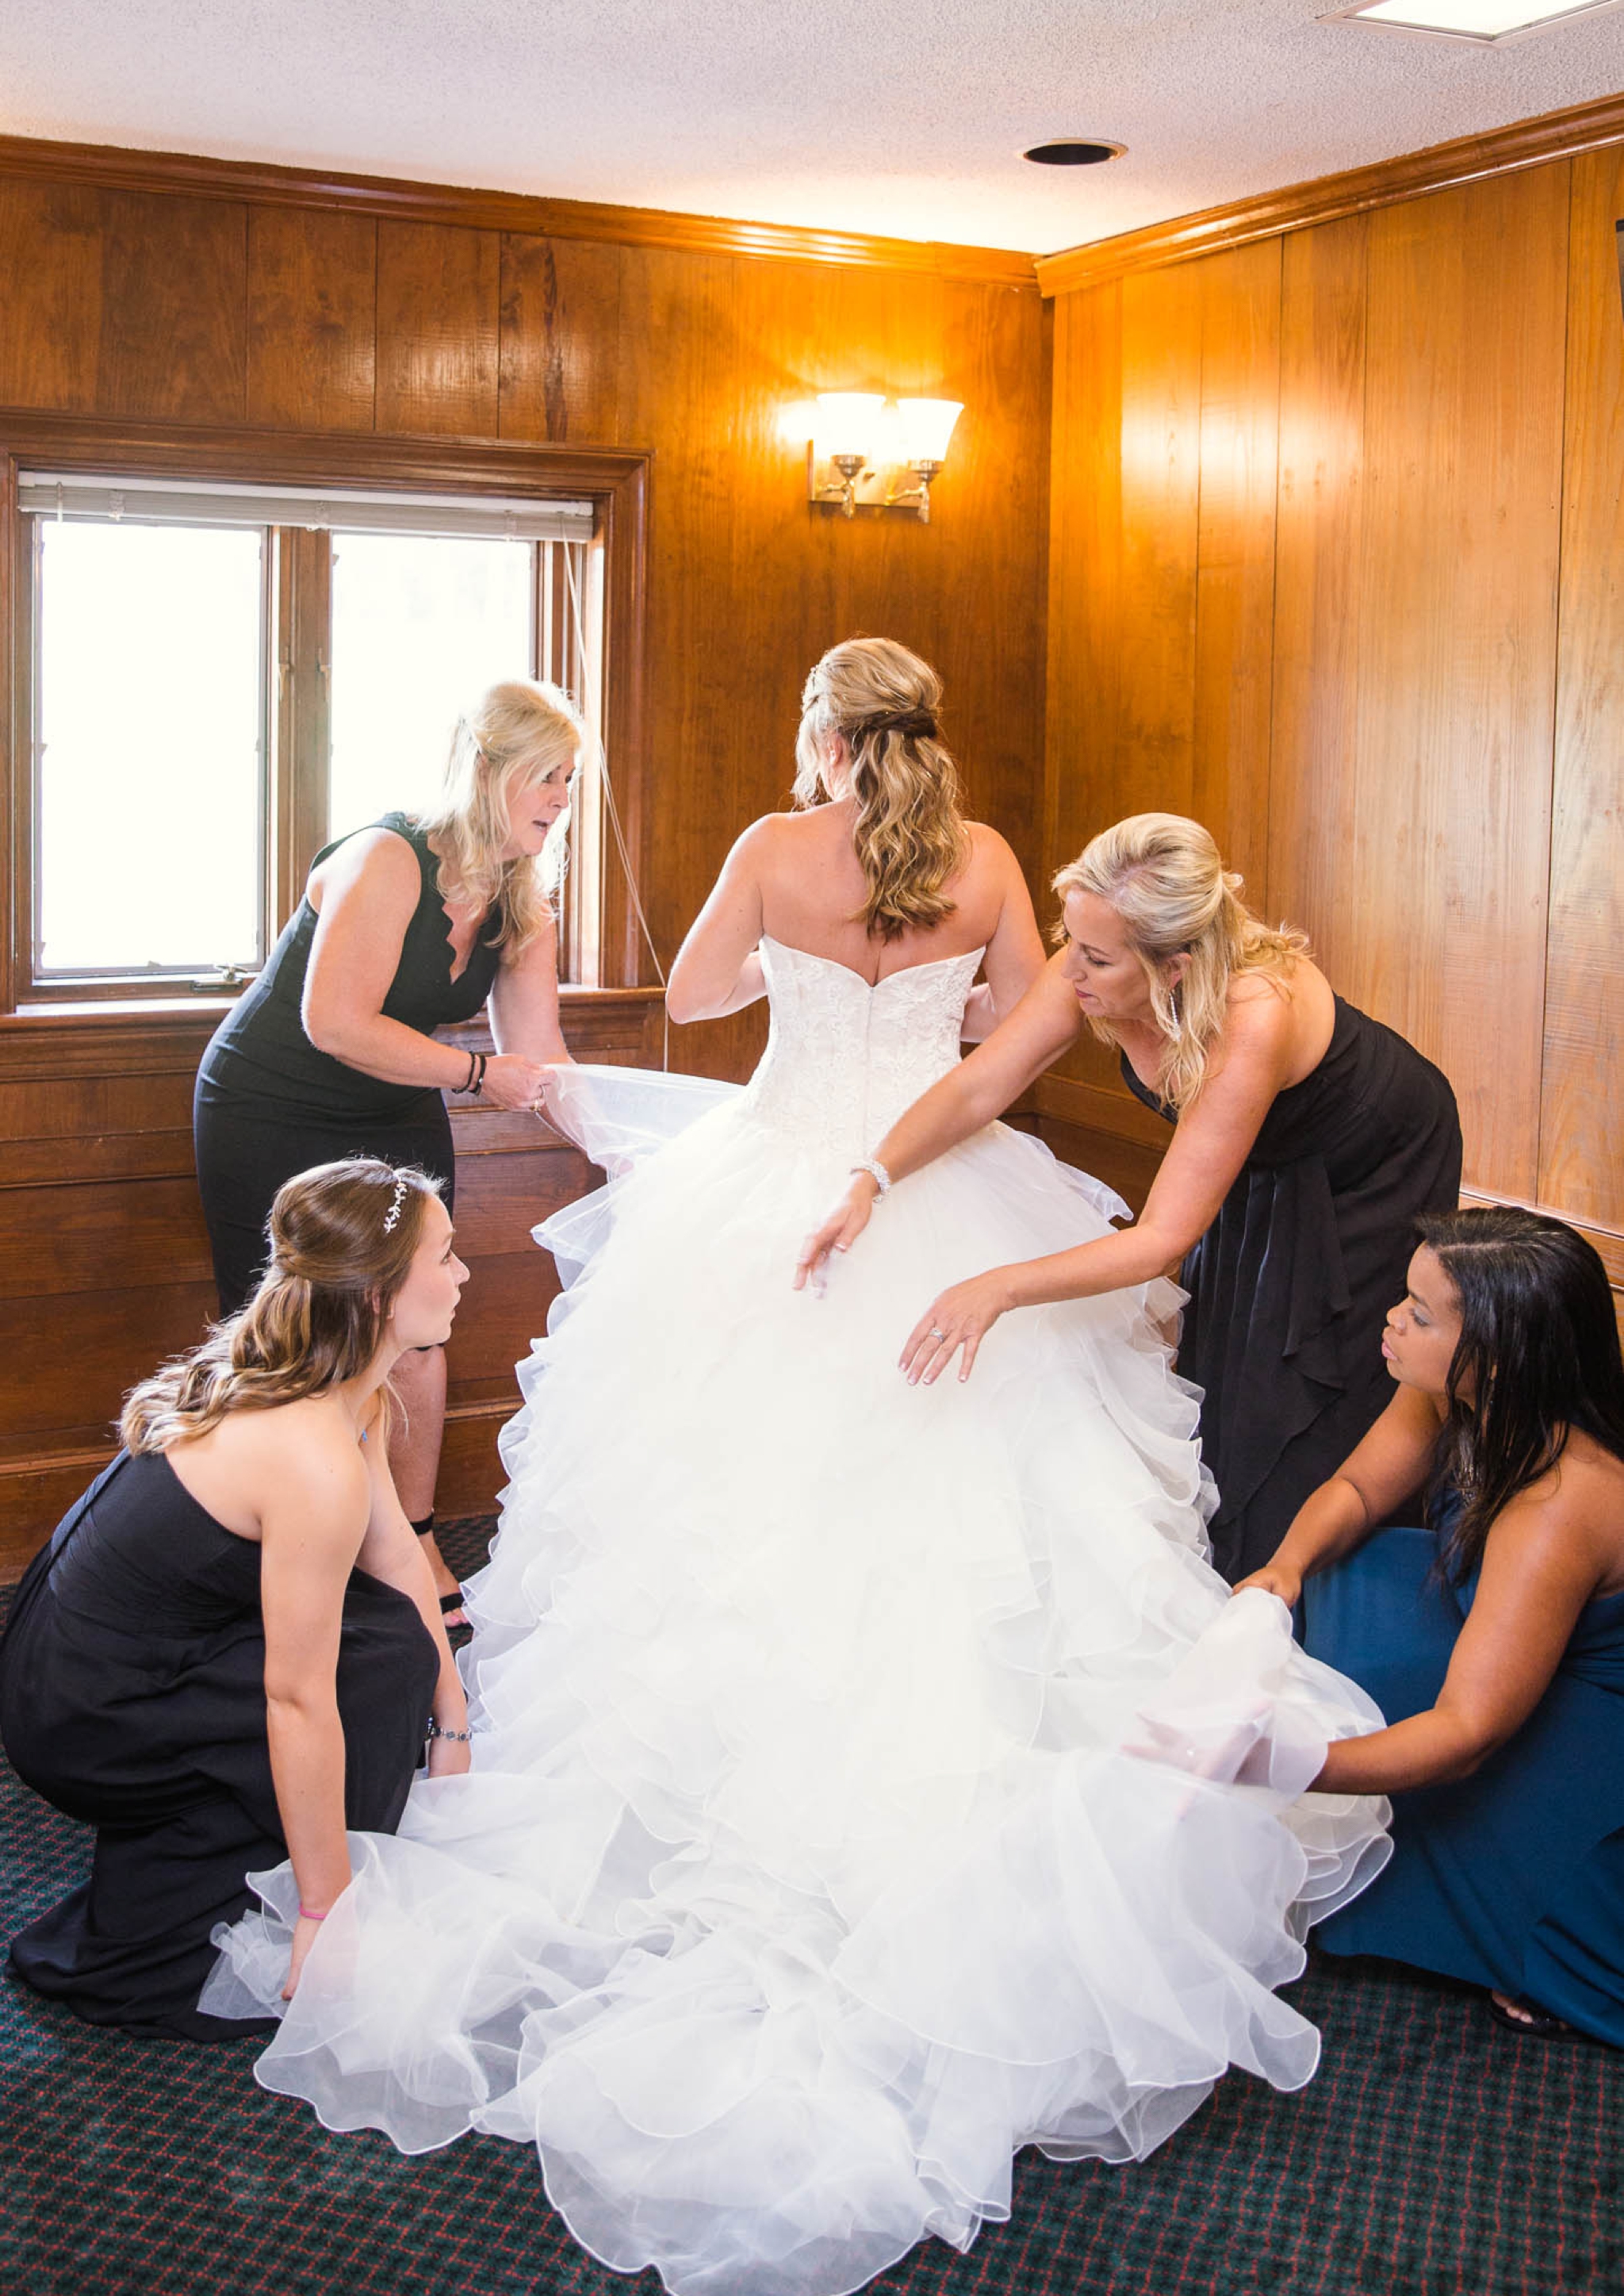 Bridesmaids fluffing the brides ball gown wedding dress - Dona + Doug - MacGregor Downs Country Club in Cary, NC - Raleigh Wedding Photographer